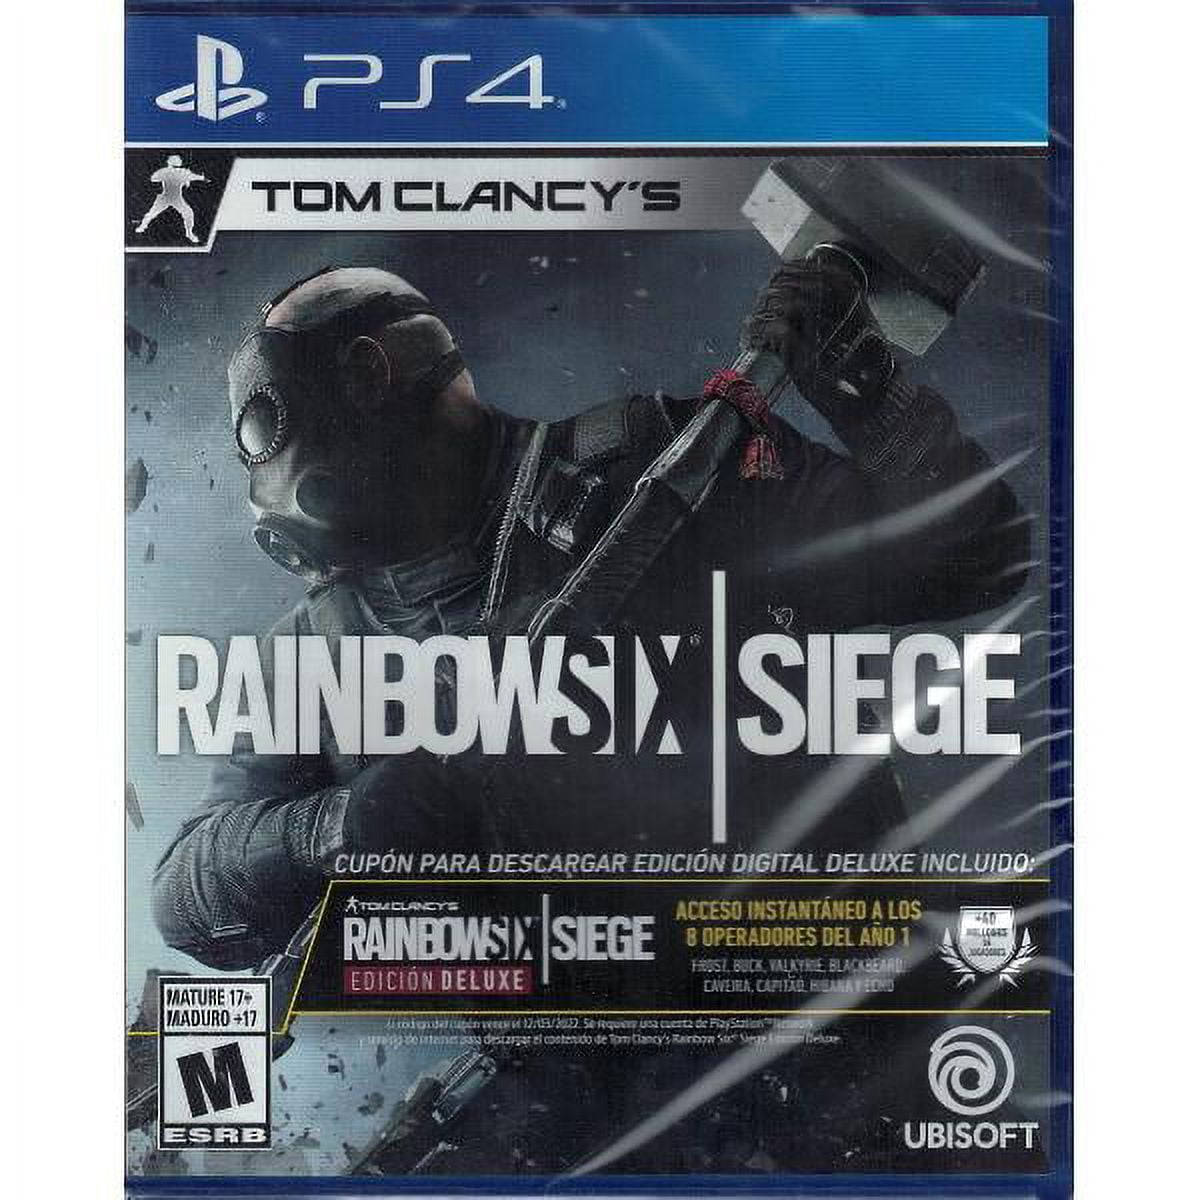 Tom Clancy's Rainbow Six Siege Deluxe Edition Ps4 - HF Games